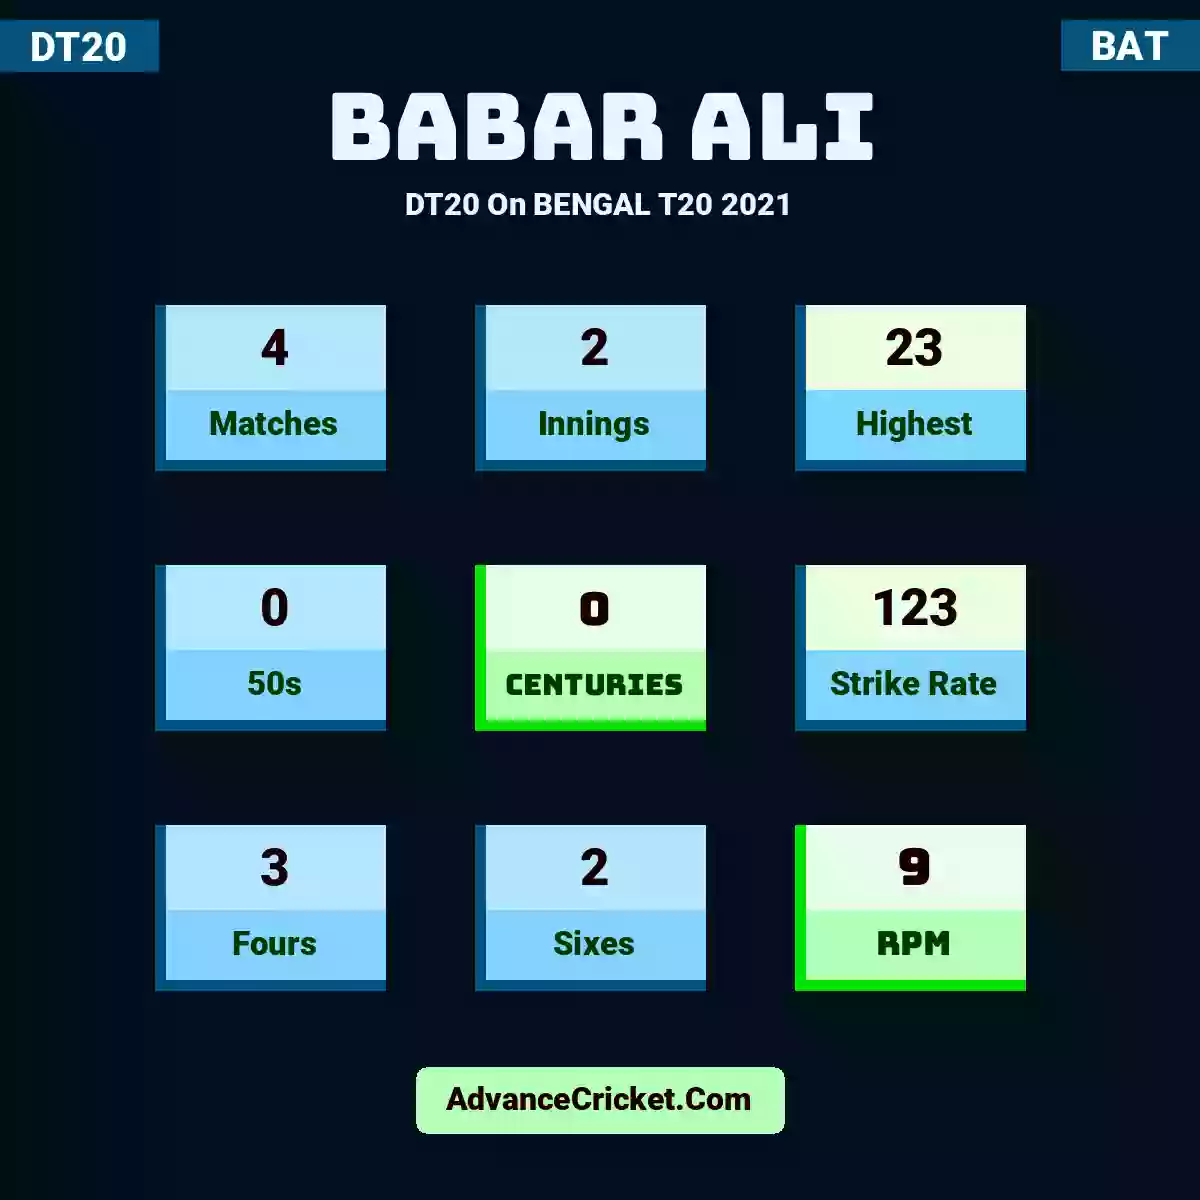 Babar Ali DT20  On BENGAL T20 2021, Babar Ali played 4 matches, scored 23 runs as highest, 0 half-centuries, and 0 centuries, with a strike rate of 123. B.Ali hit 3 fours and 2 sixes, with an RPM of 9.